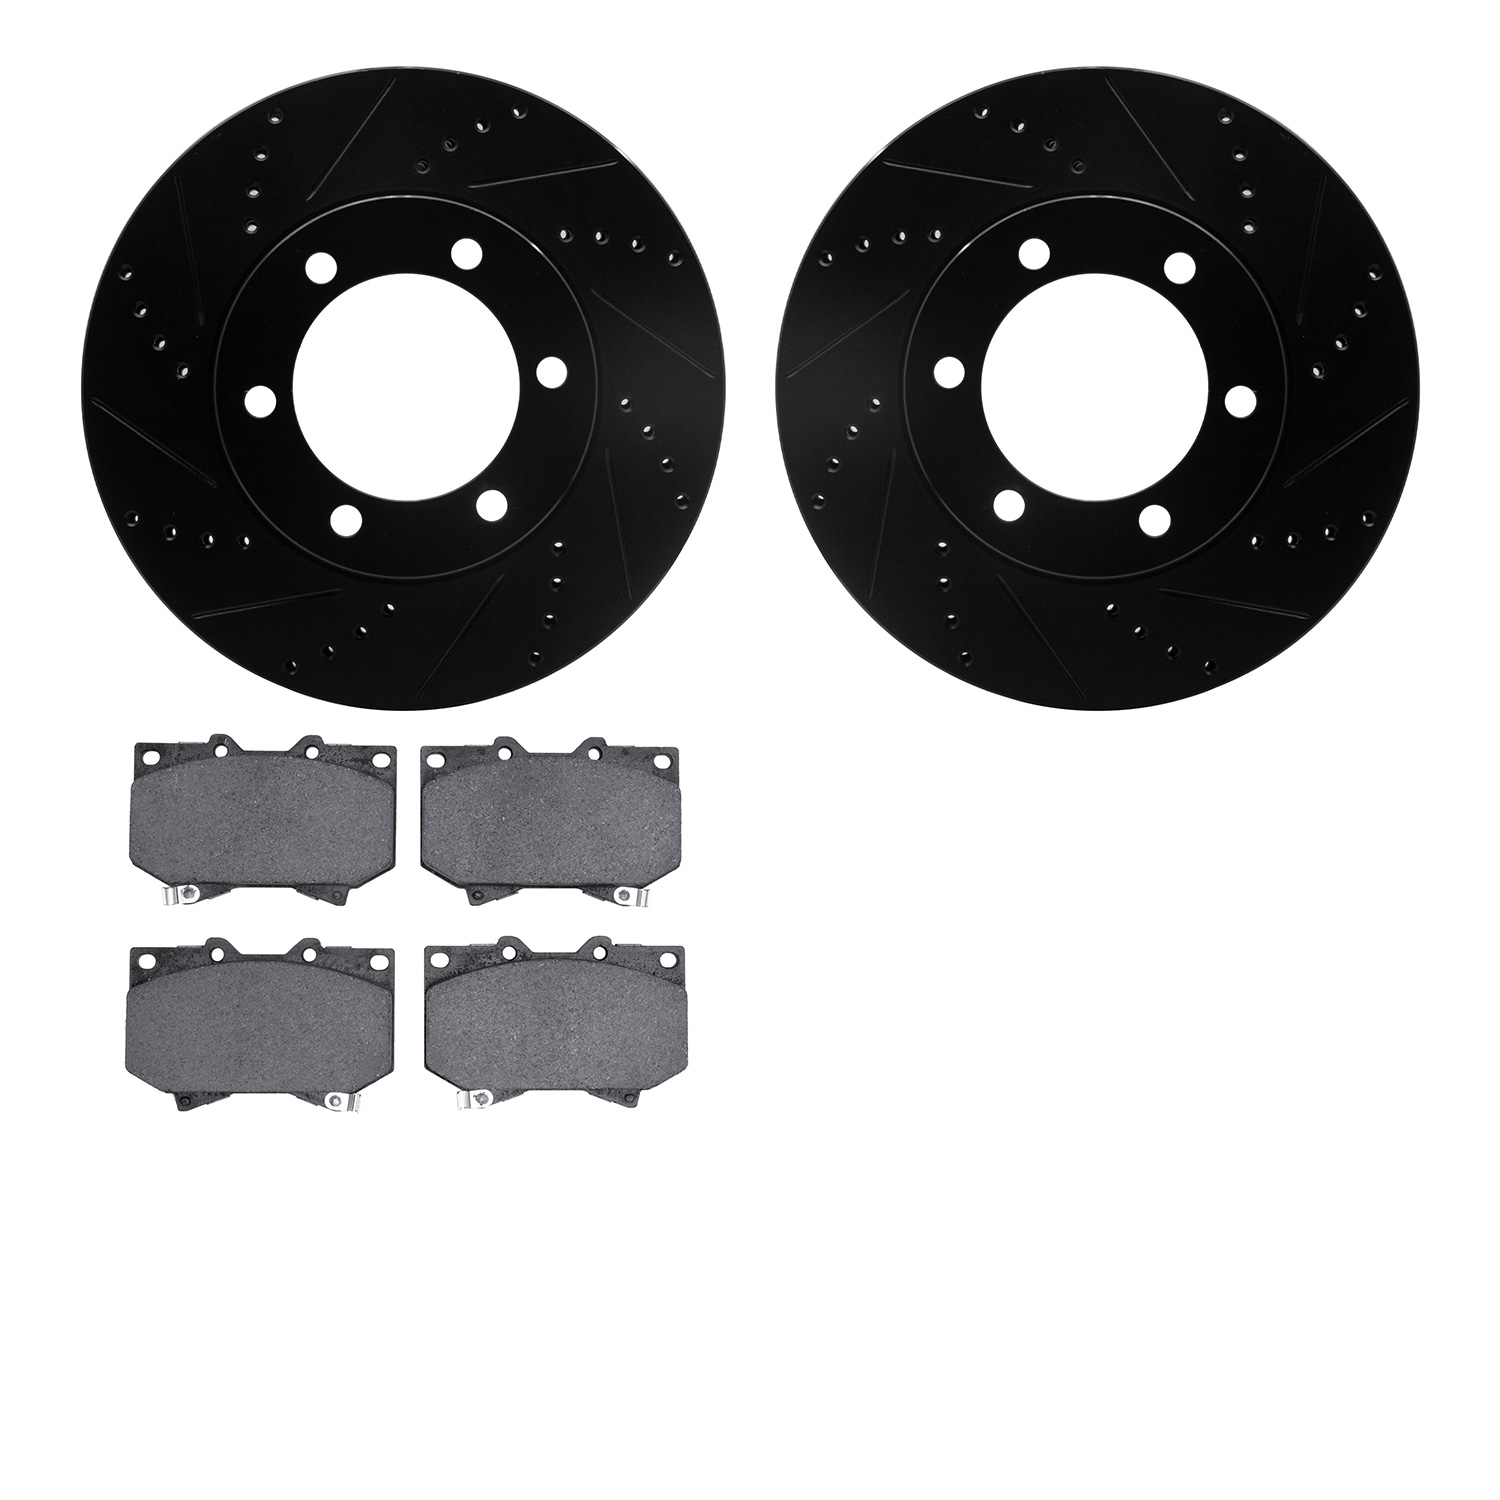 8402-76014 Drilled/Slotted Brake Rotors with Ultimate-Duty Brake Pads Kit [Black], 2000-2002 Lexus/Toyota/Scion, Position: Front